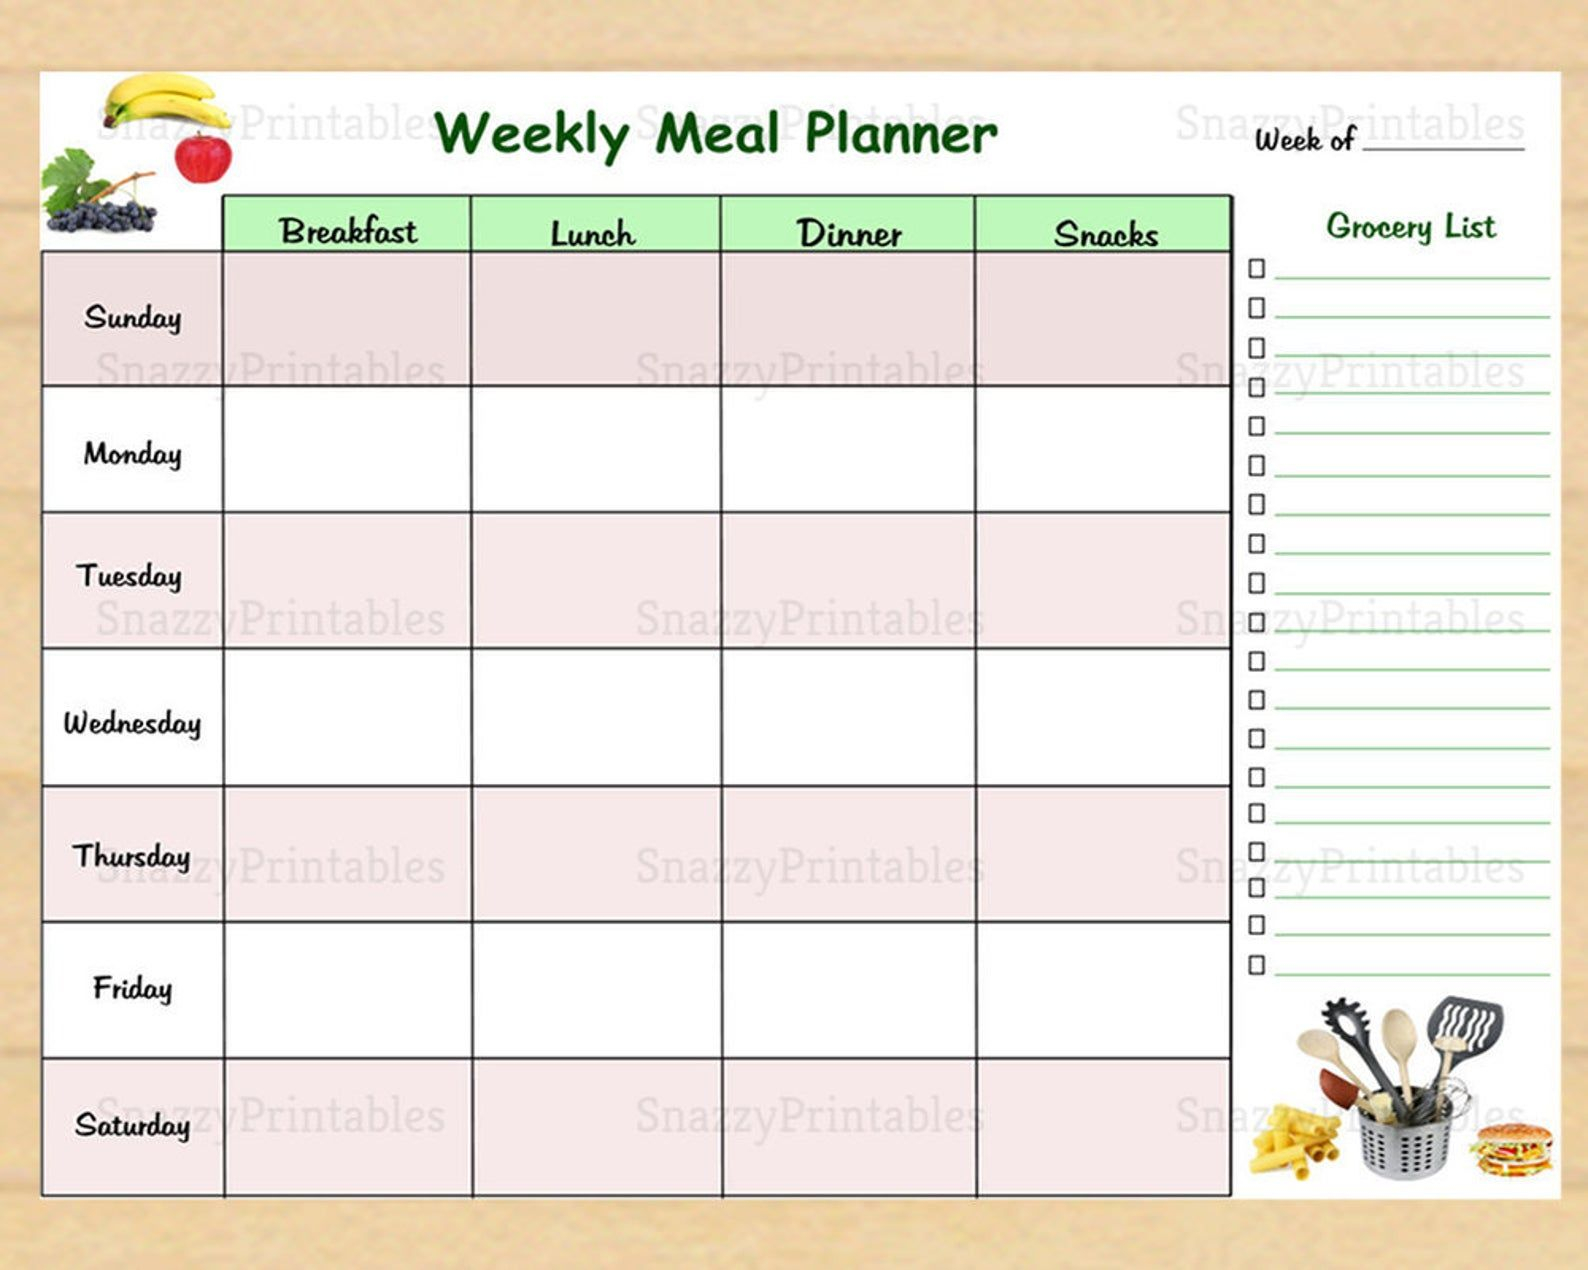 Weekly Meal Planner Printable With Grocery List Weekly